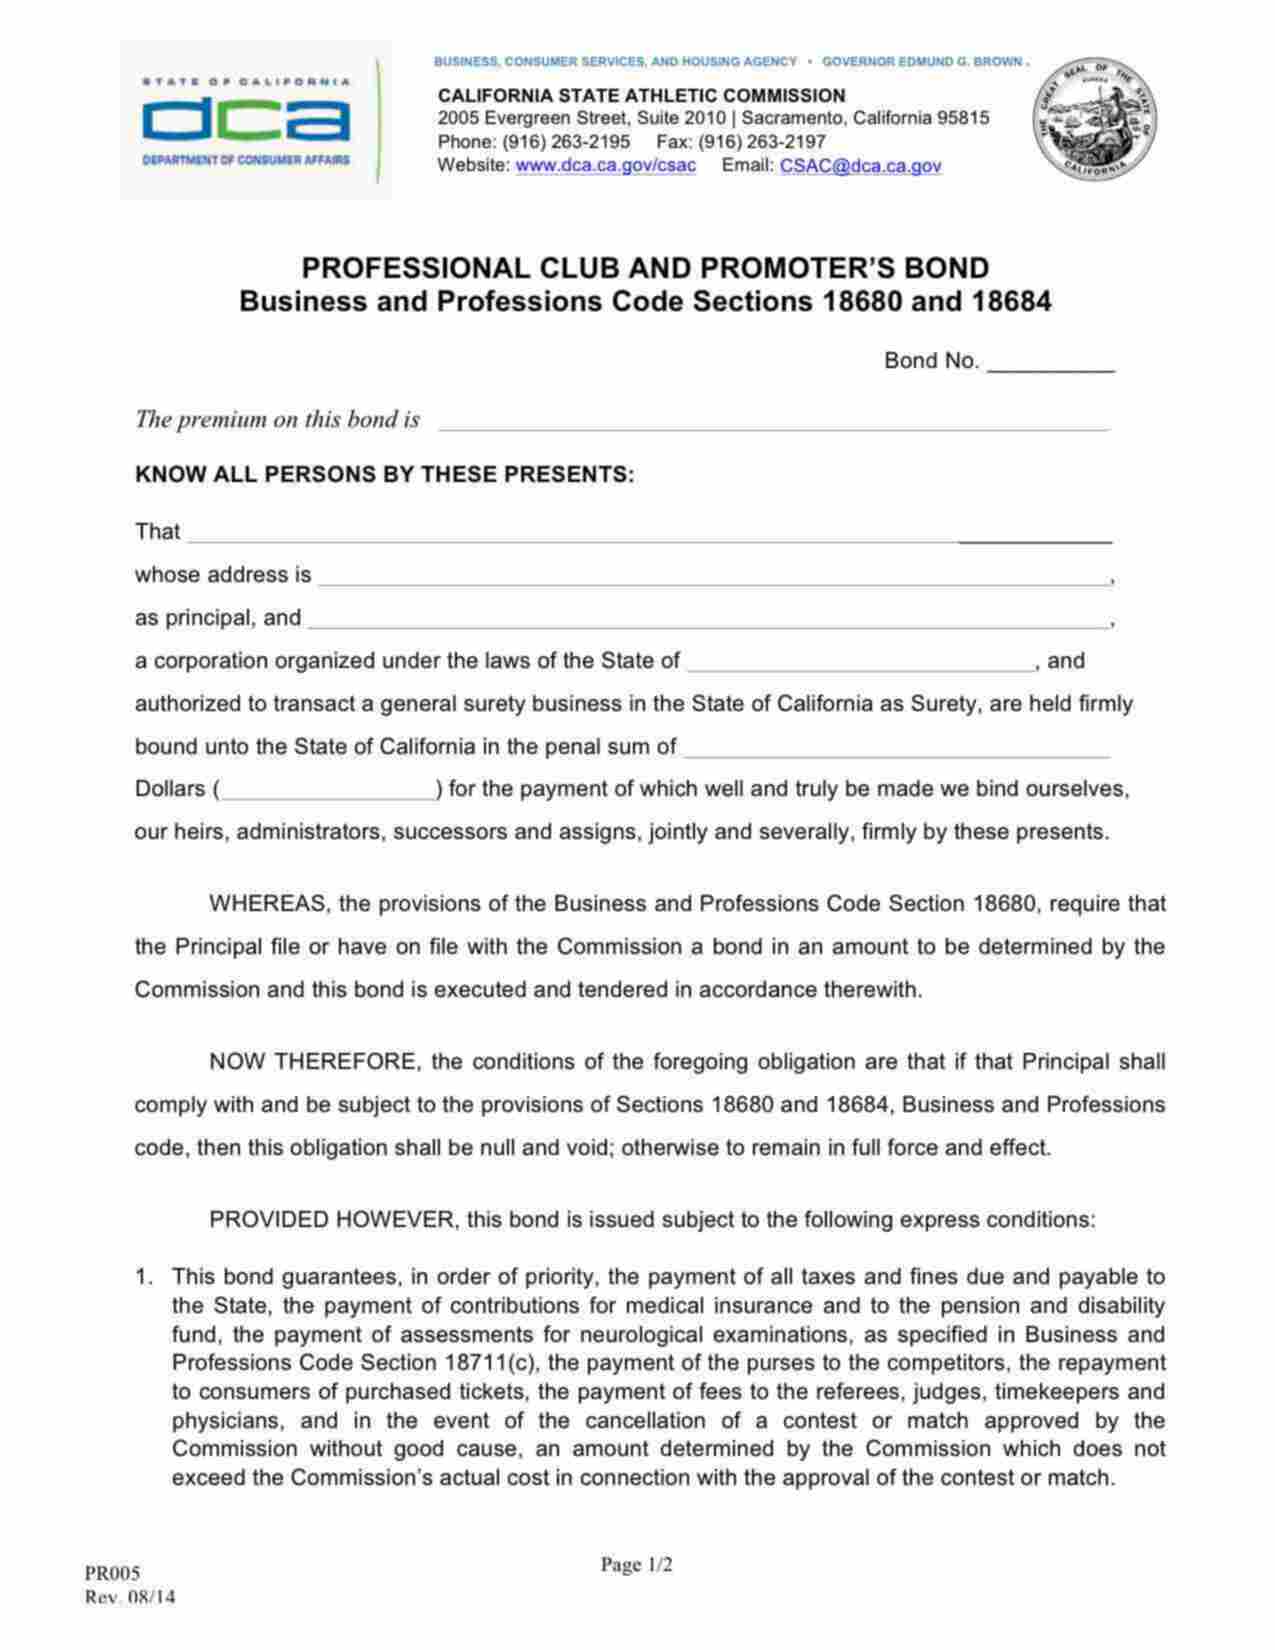 California Professional Club and Promoter Bond Form